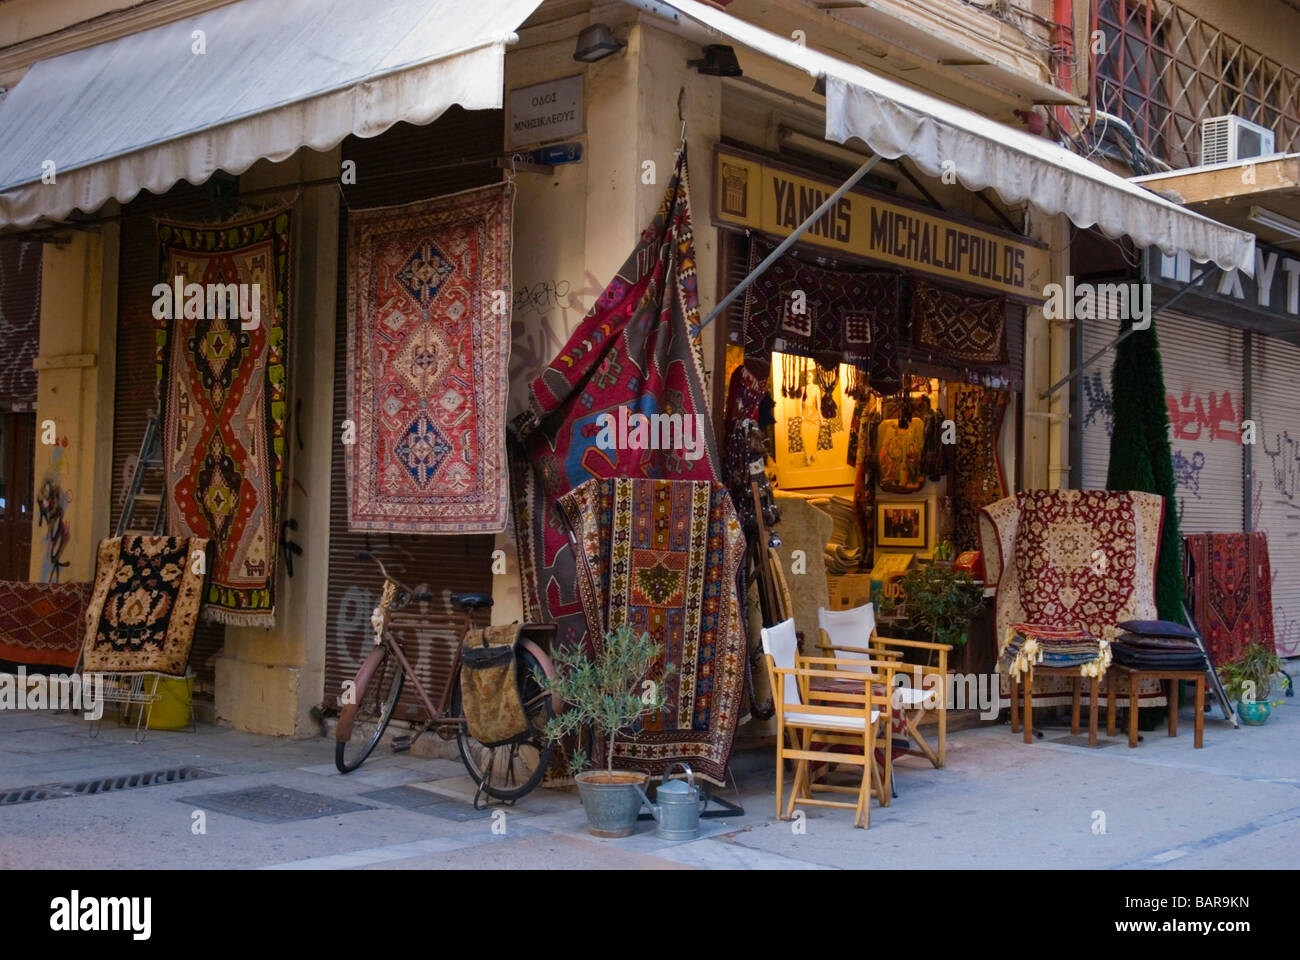 Athens Store Front High Resolution Stock Photography and Images - Alamy